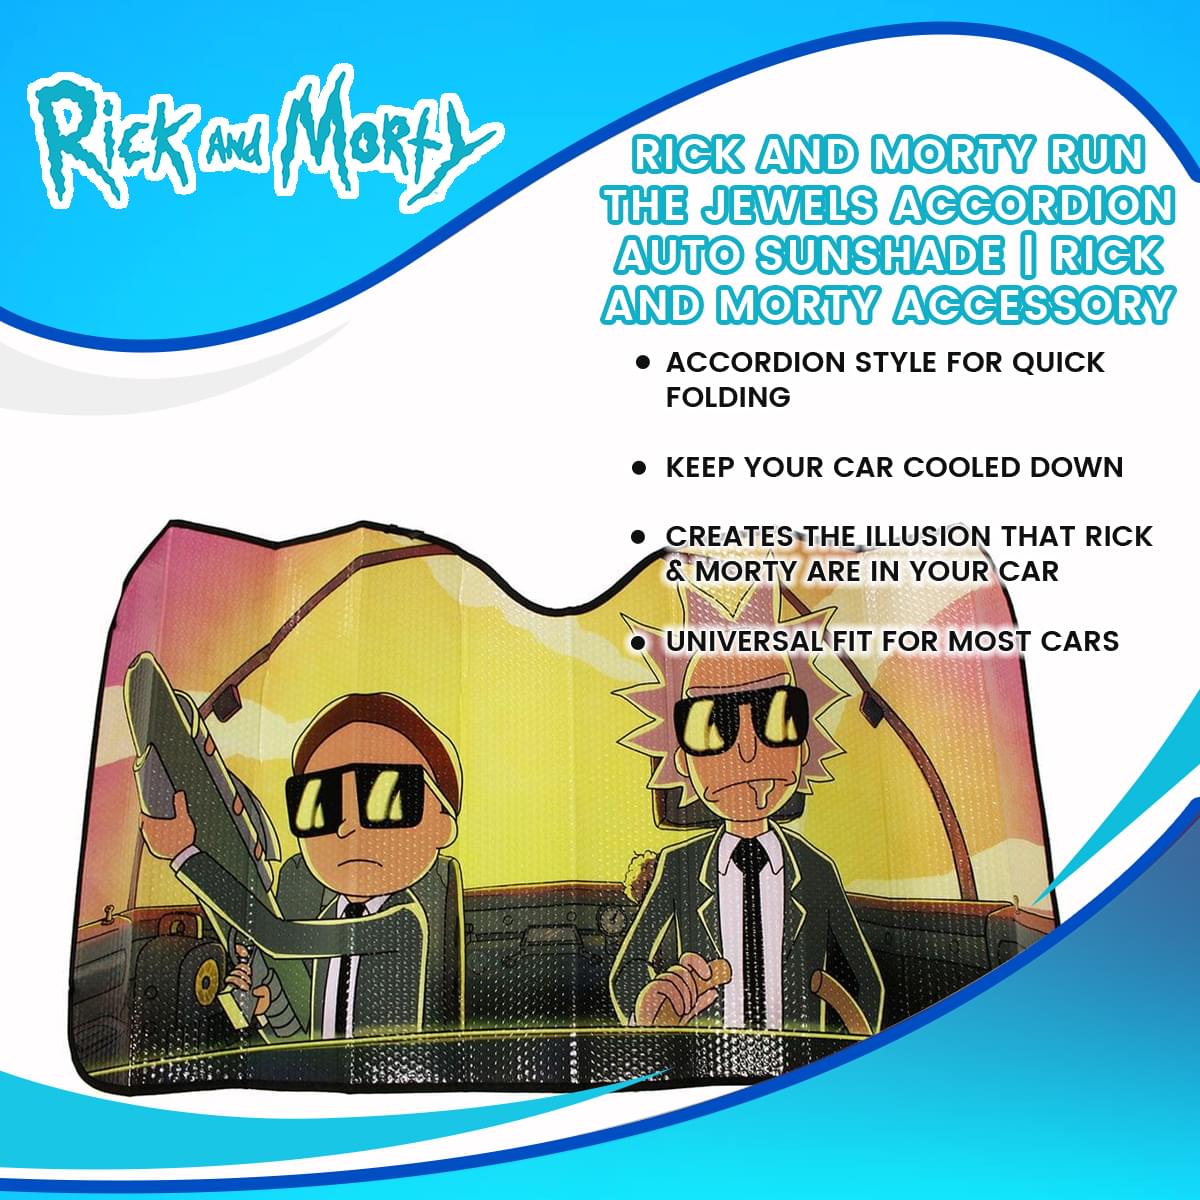 Rick and Morty Run the Jewels Accordion Auto Sunshade | Rick And Morty Accessory